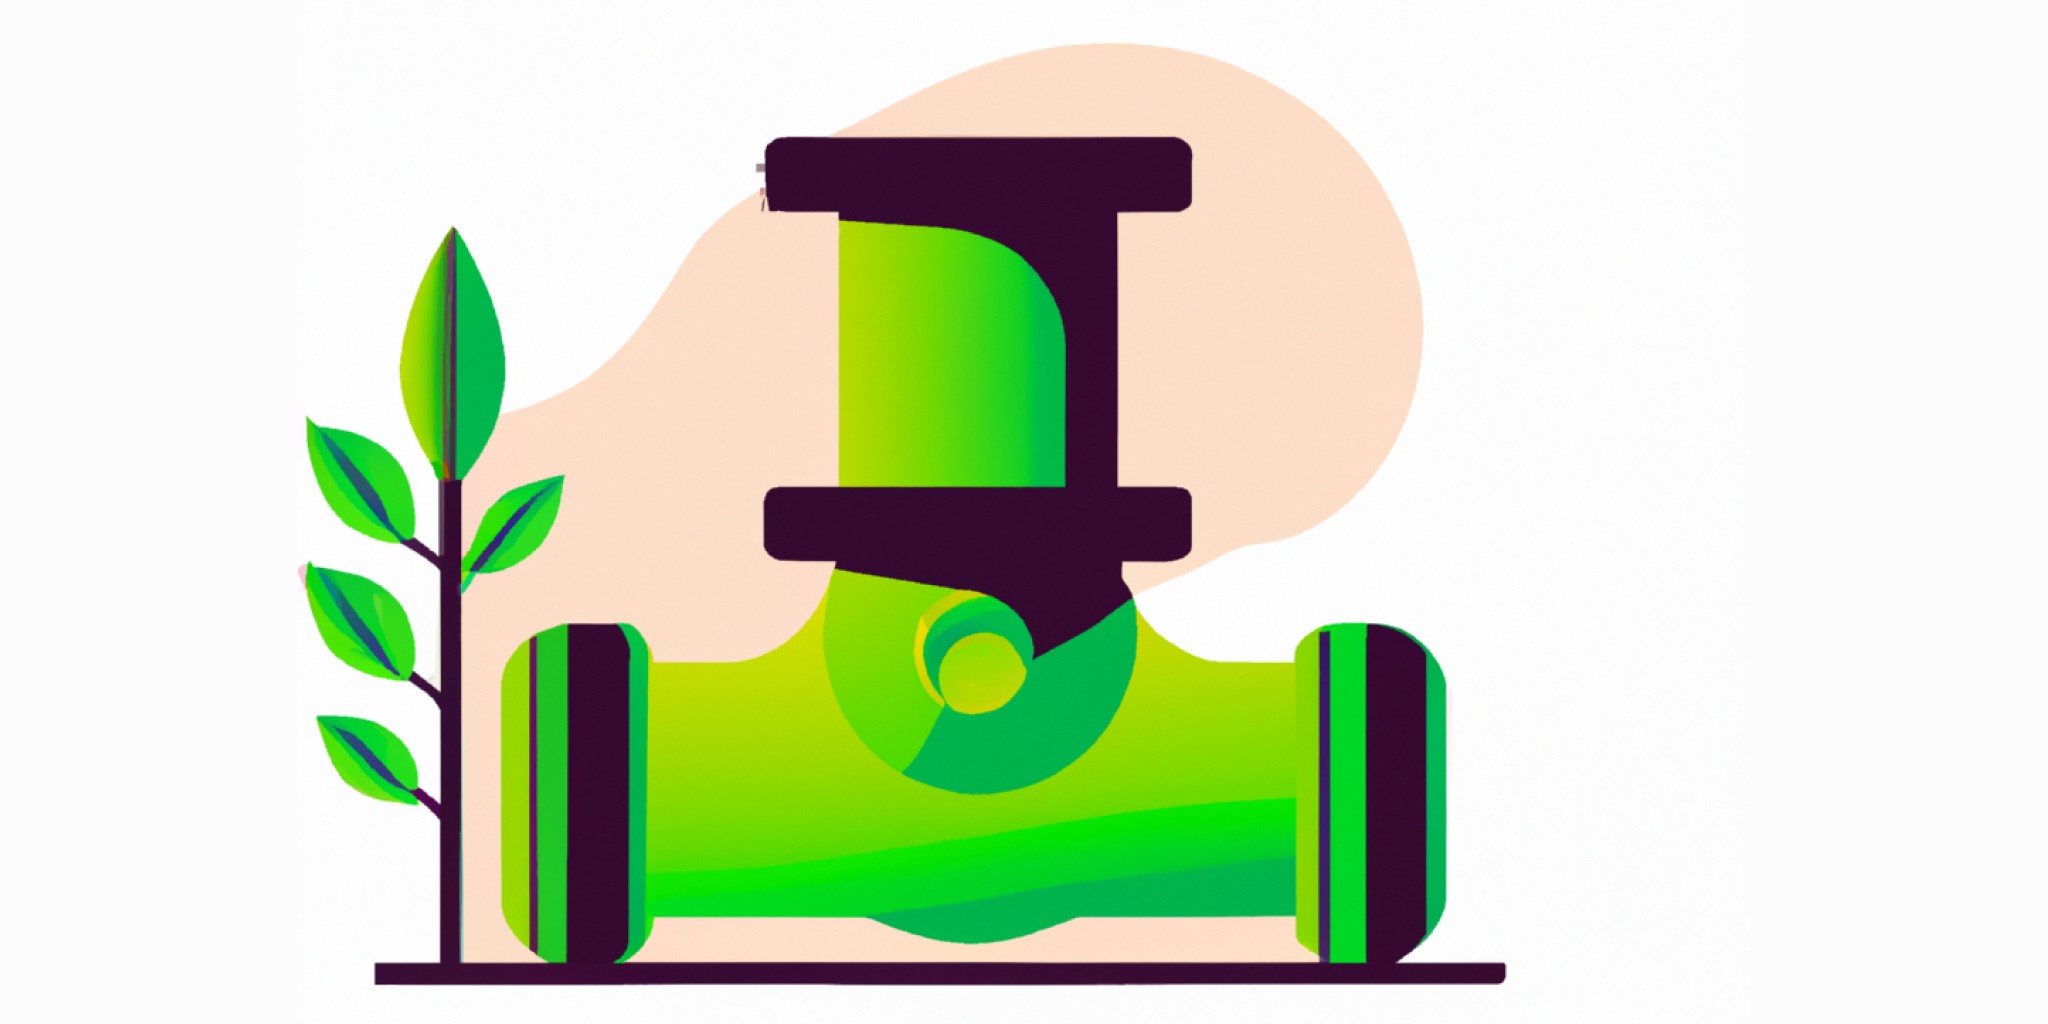 green pipe ending in a plant in flat illustration style with gradients and white background